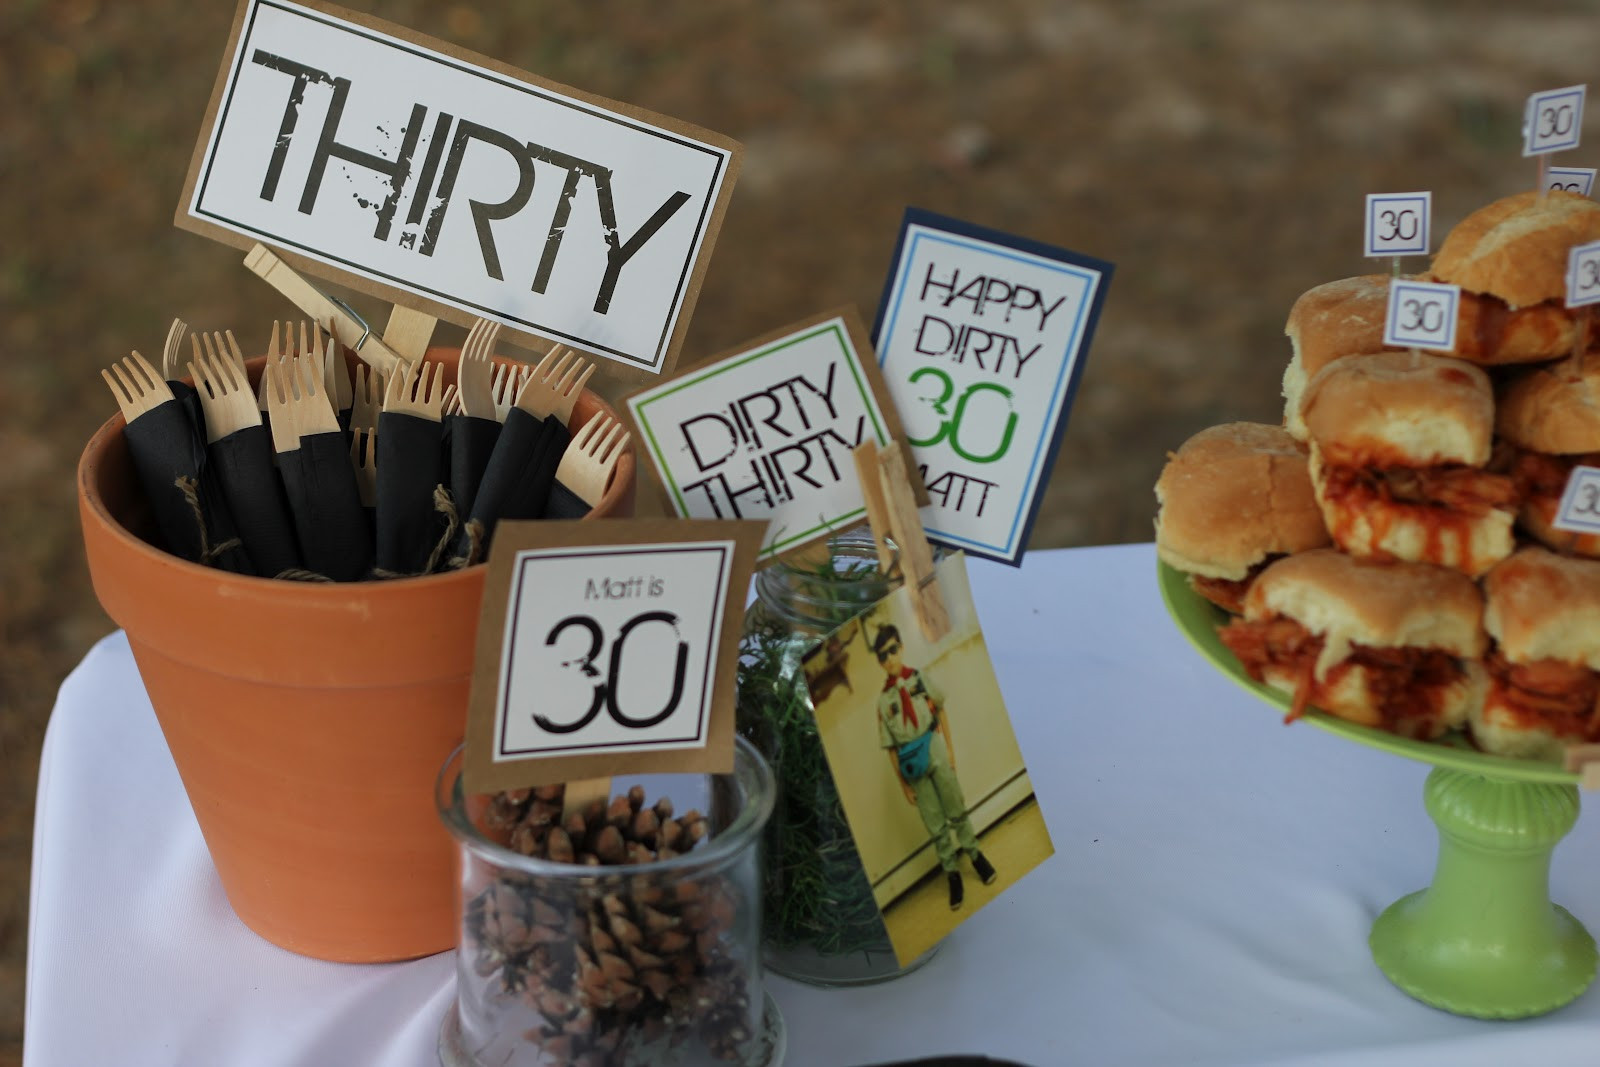 Dirty Thirty Birthday Party Ideas
 7 Clever Themes for a Smashing 30th Birthday Party